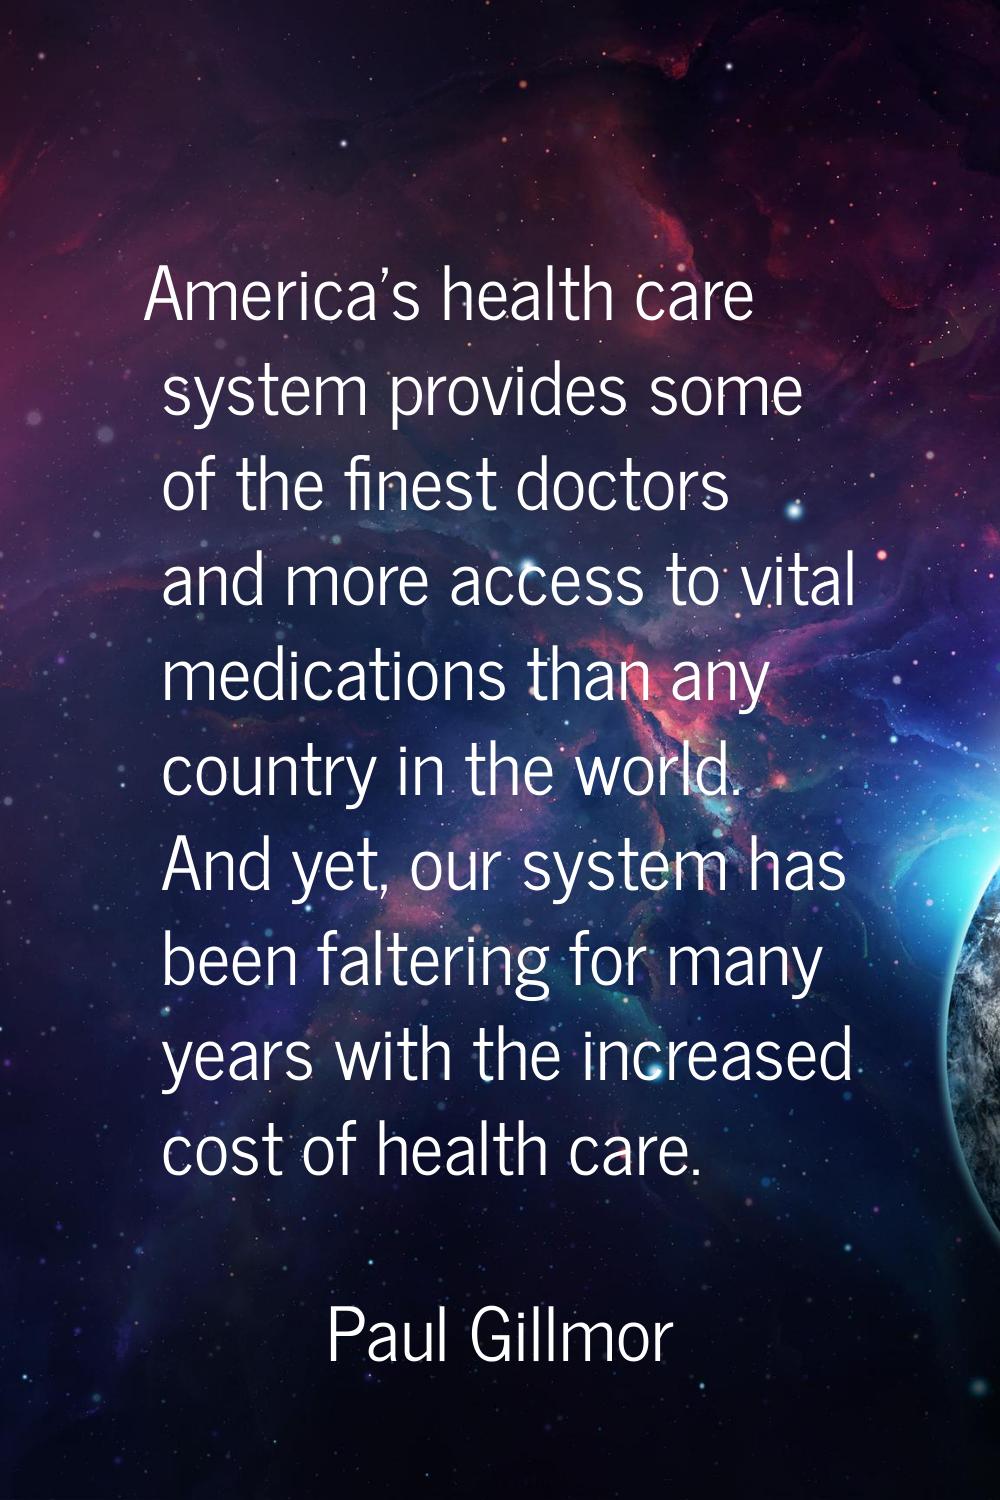 America's health care system provides some of the finest doctors and more access to vital medicatio